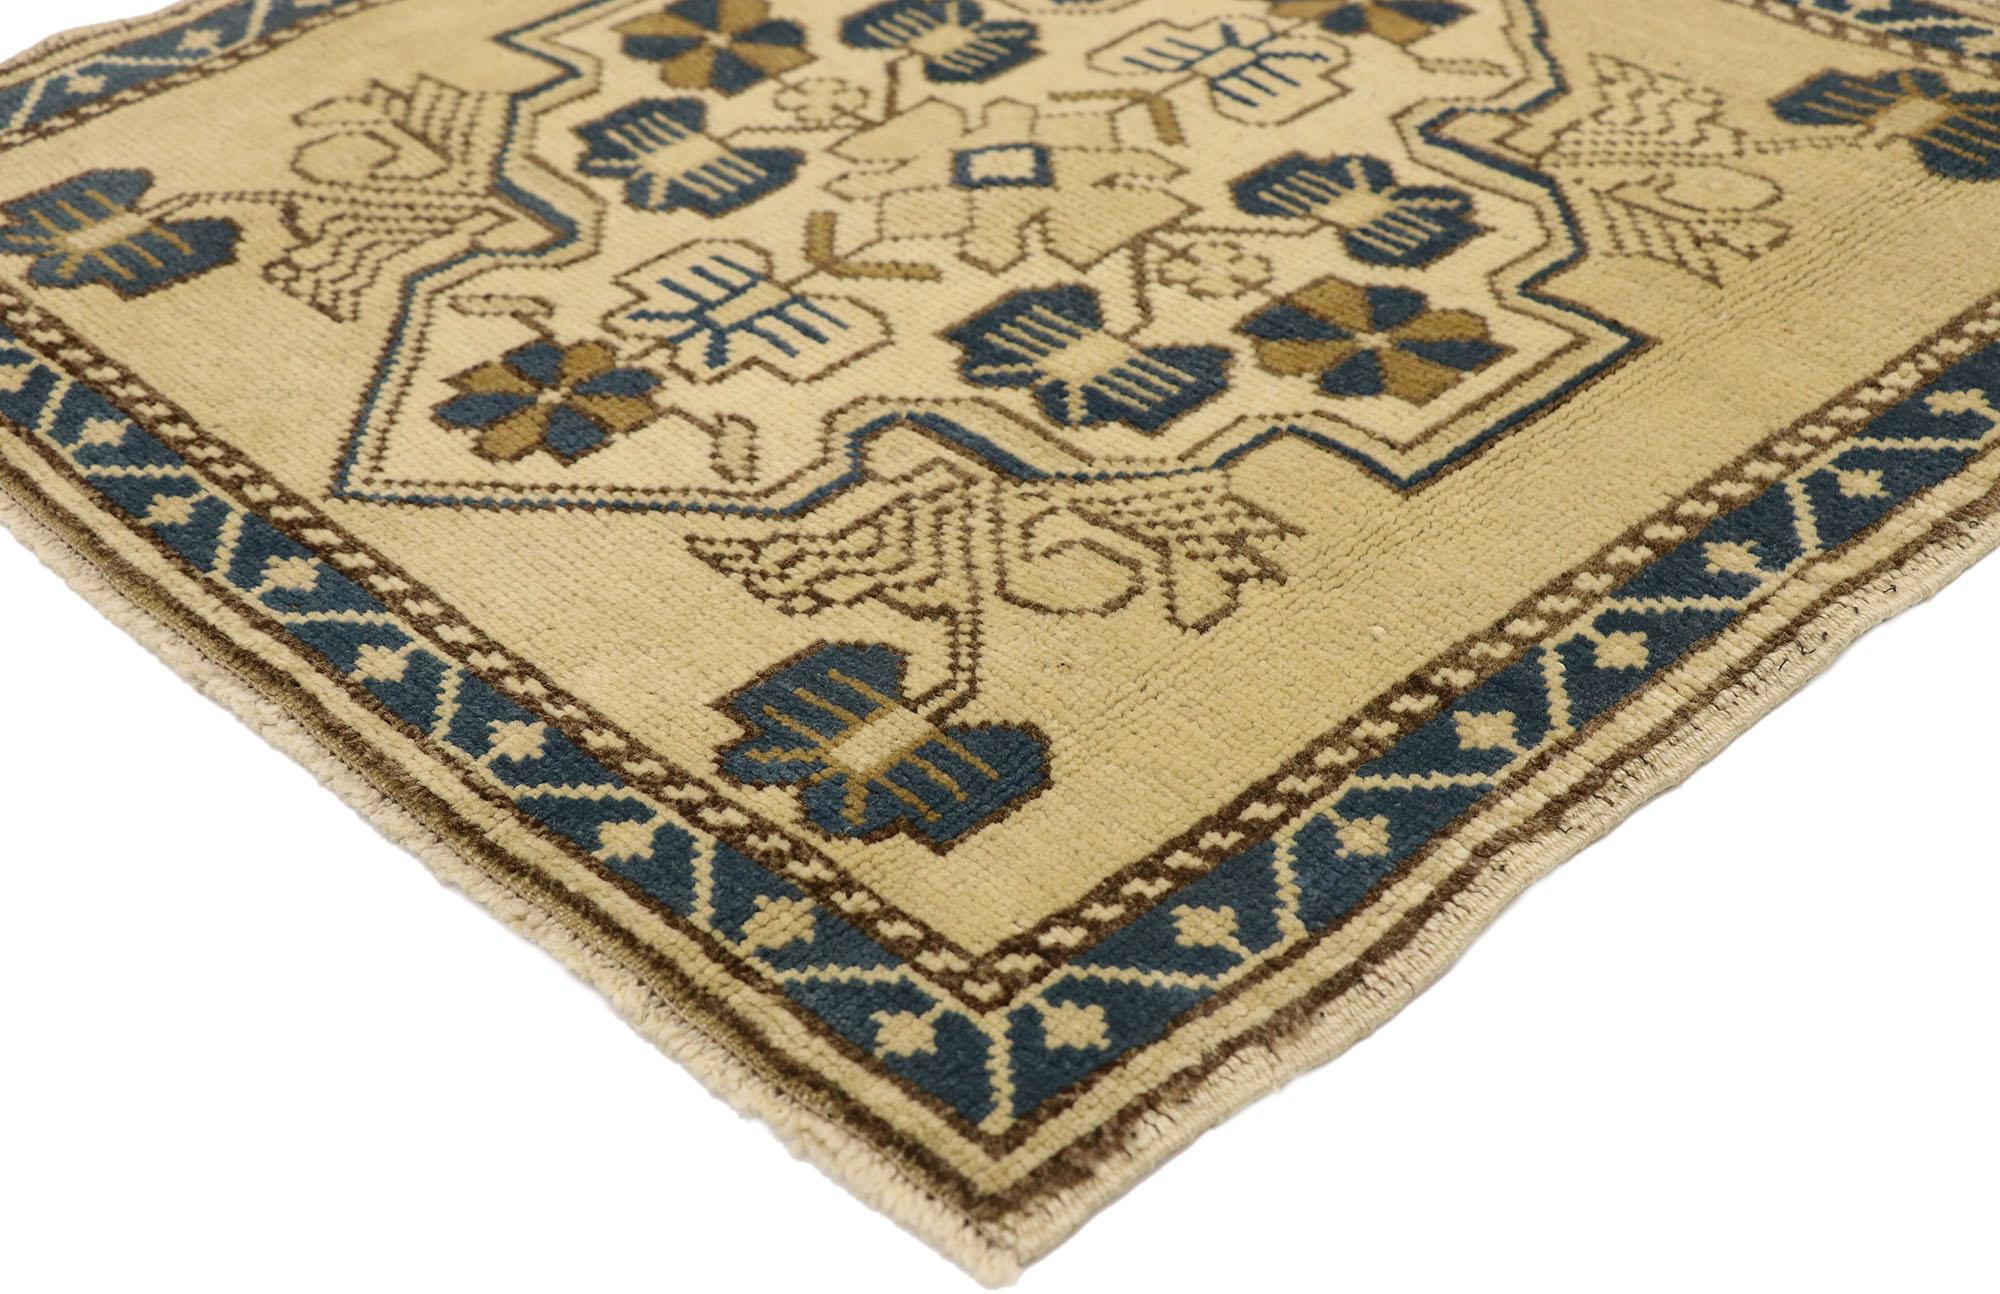 51258 Vintage Turkish Yastik Rug, 02'02 x 02'02. In this hand-knotted wool vintage Turkish Yastik rug, effortless beauty and understated elegance merge to create a captivating piece with a subtle Mediterranean flair. The ecru-tan antique-washed